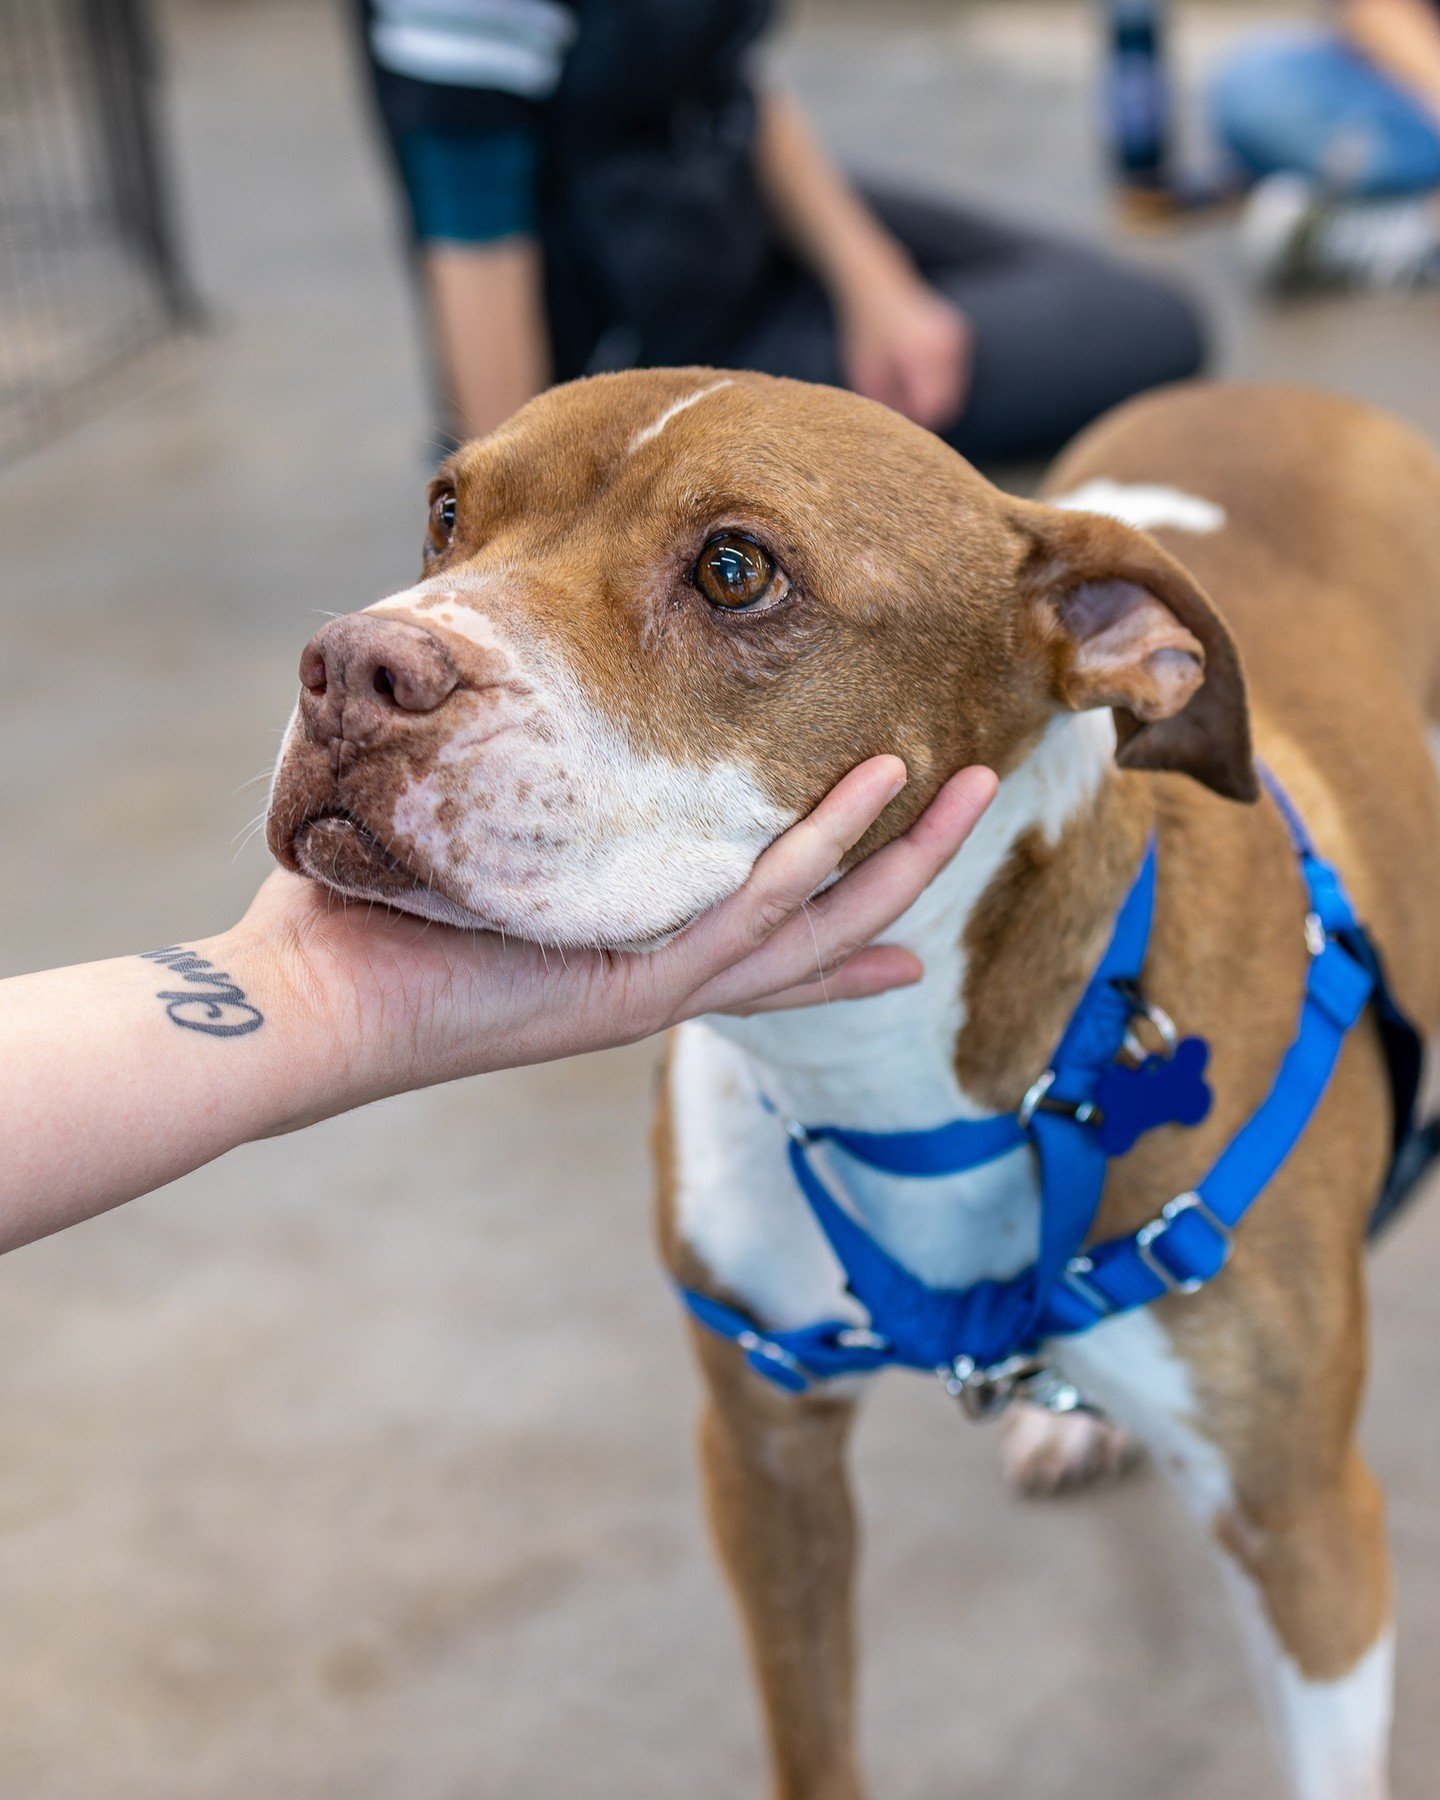 Happy Friday from our incredibly gentle, sweet, perfect angel of a senior pittie, Sandi. ⁠
⁠
We don't know much about Sandi's life before she came to us, but we do know she was found running on the highway in Pecos, TX. Thankfully, she was caught by 